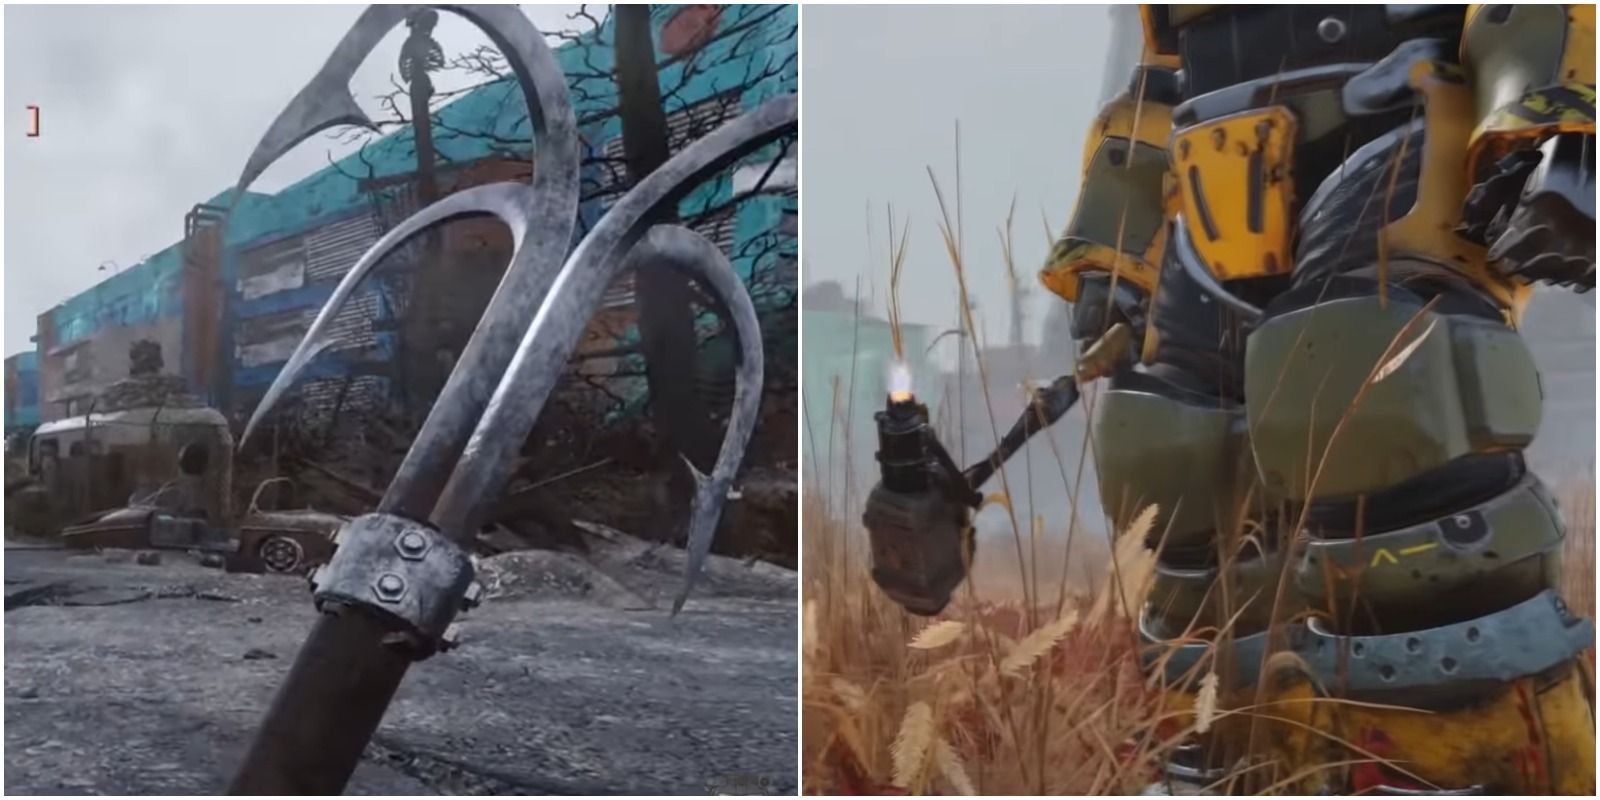 pole hook and power armor split image, fallout 76